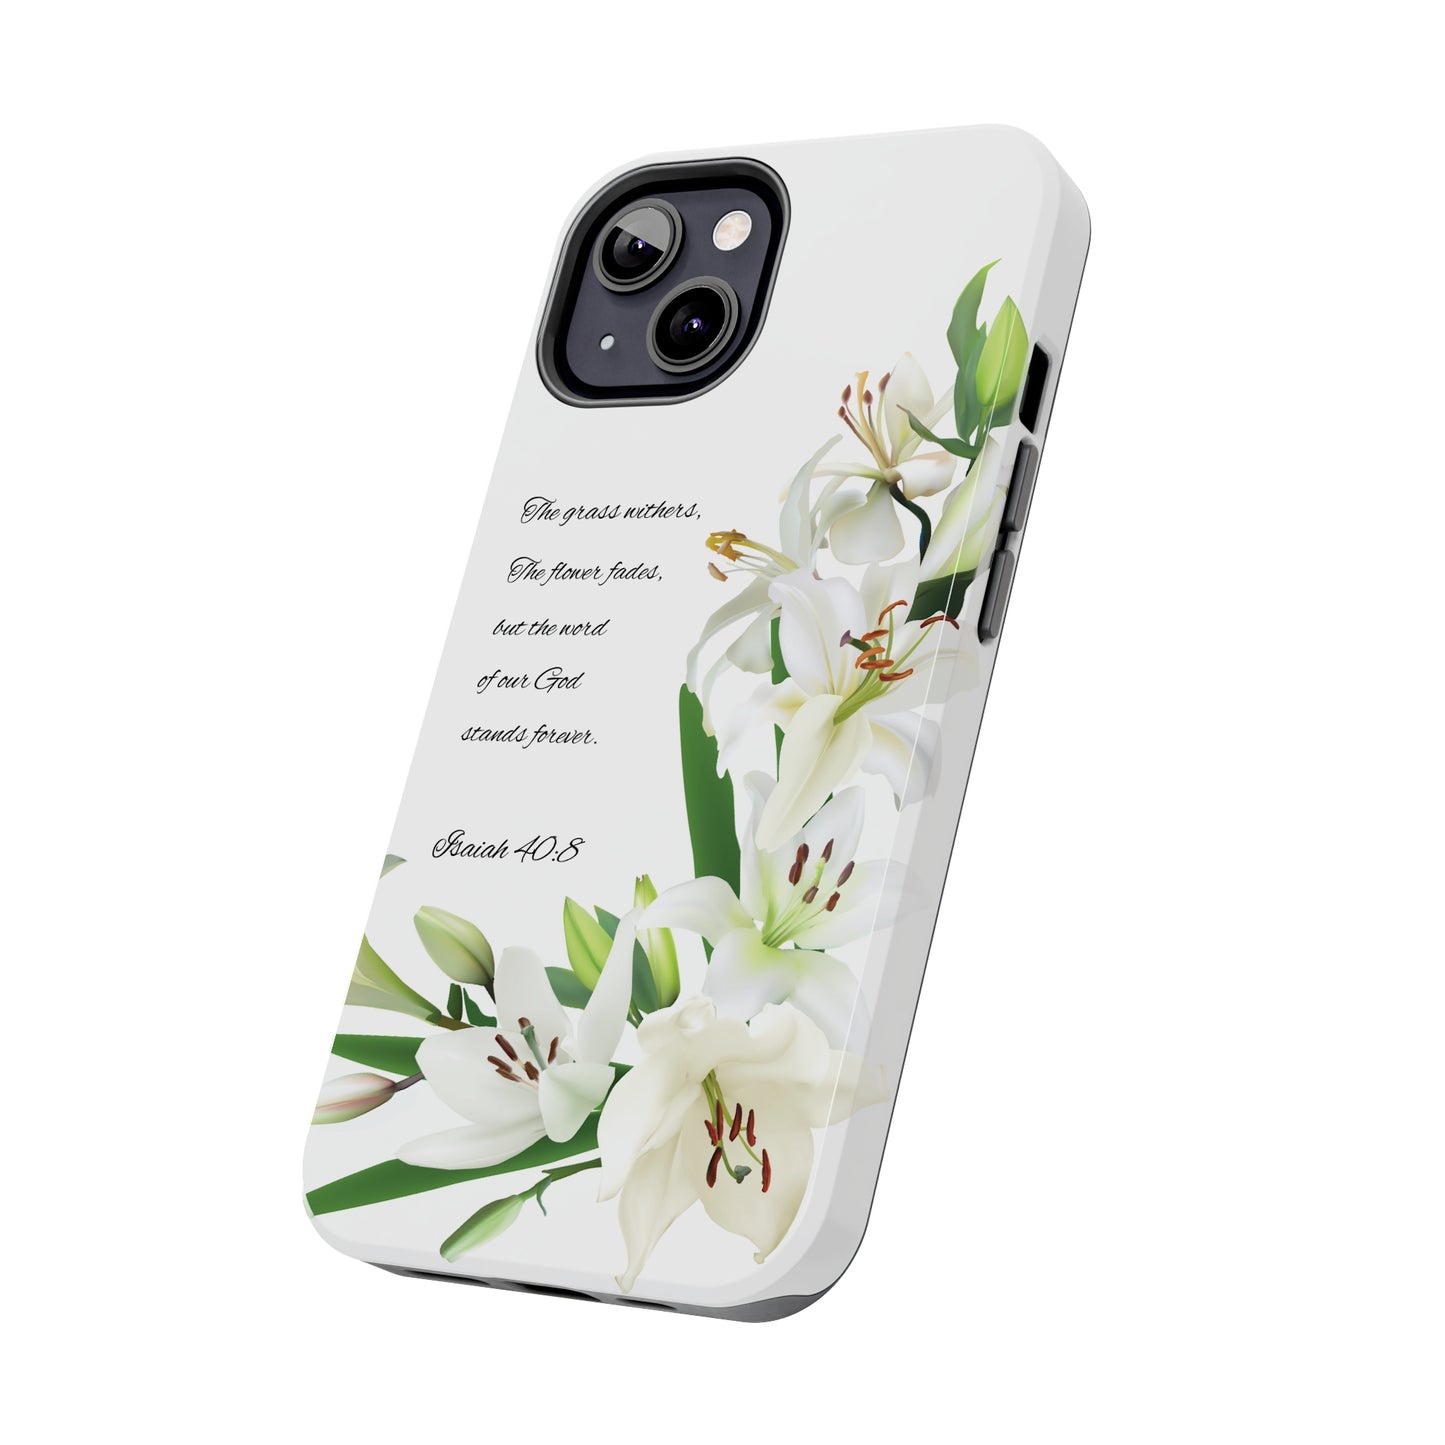 God Stands Forever iPhone Case